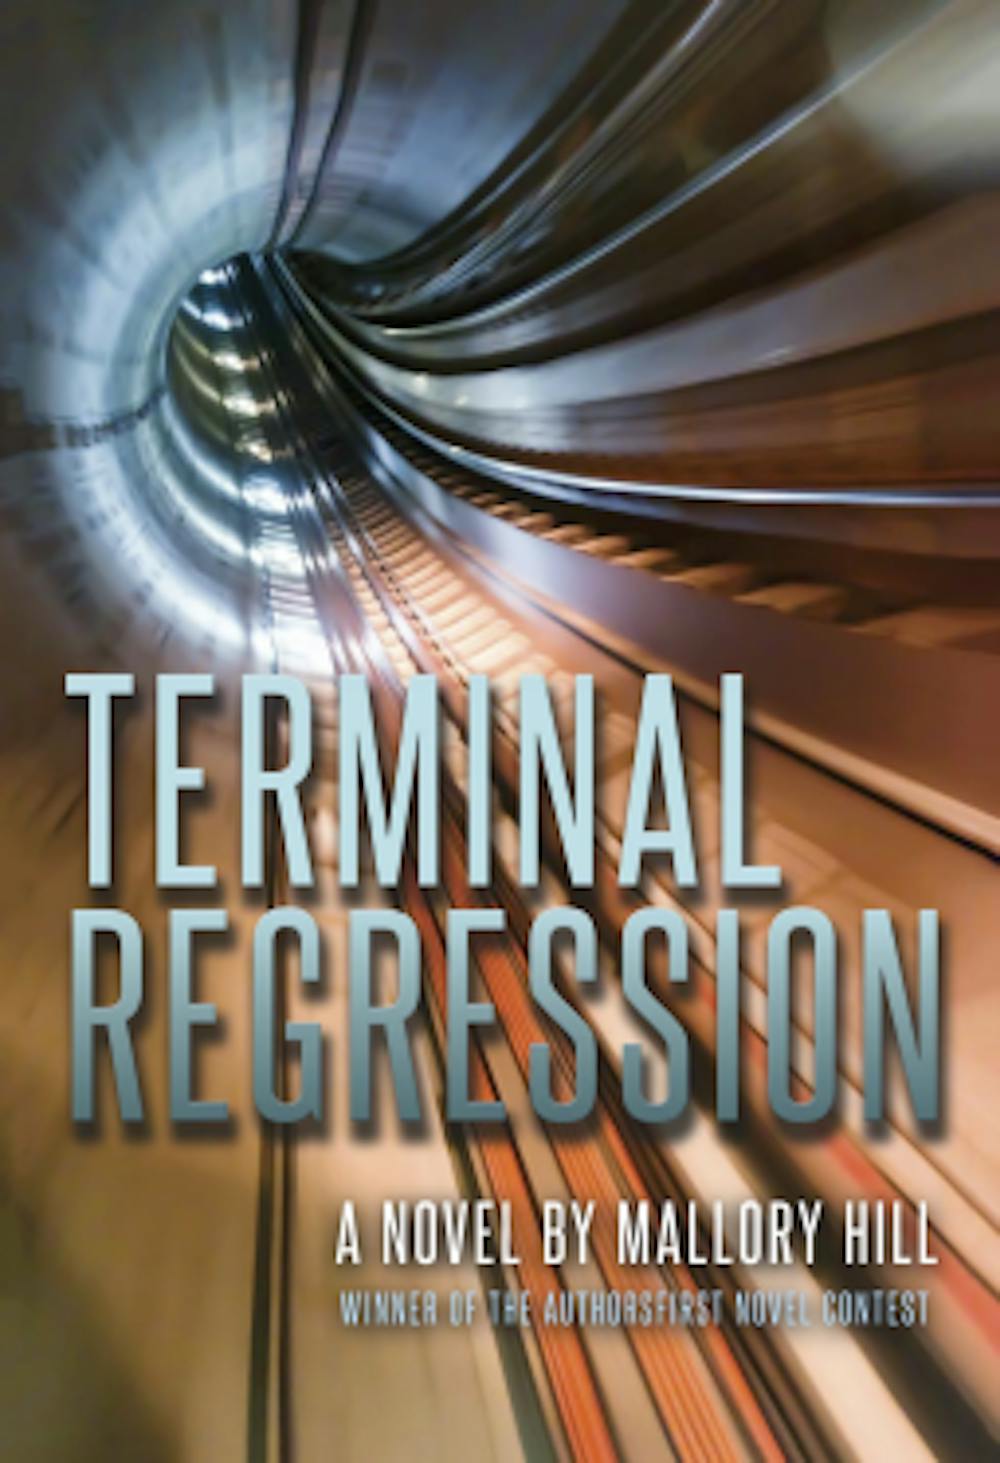 "Terminal Regression"&nbsp;by IU junior Mallory Hill will be available Jan. 17.